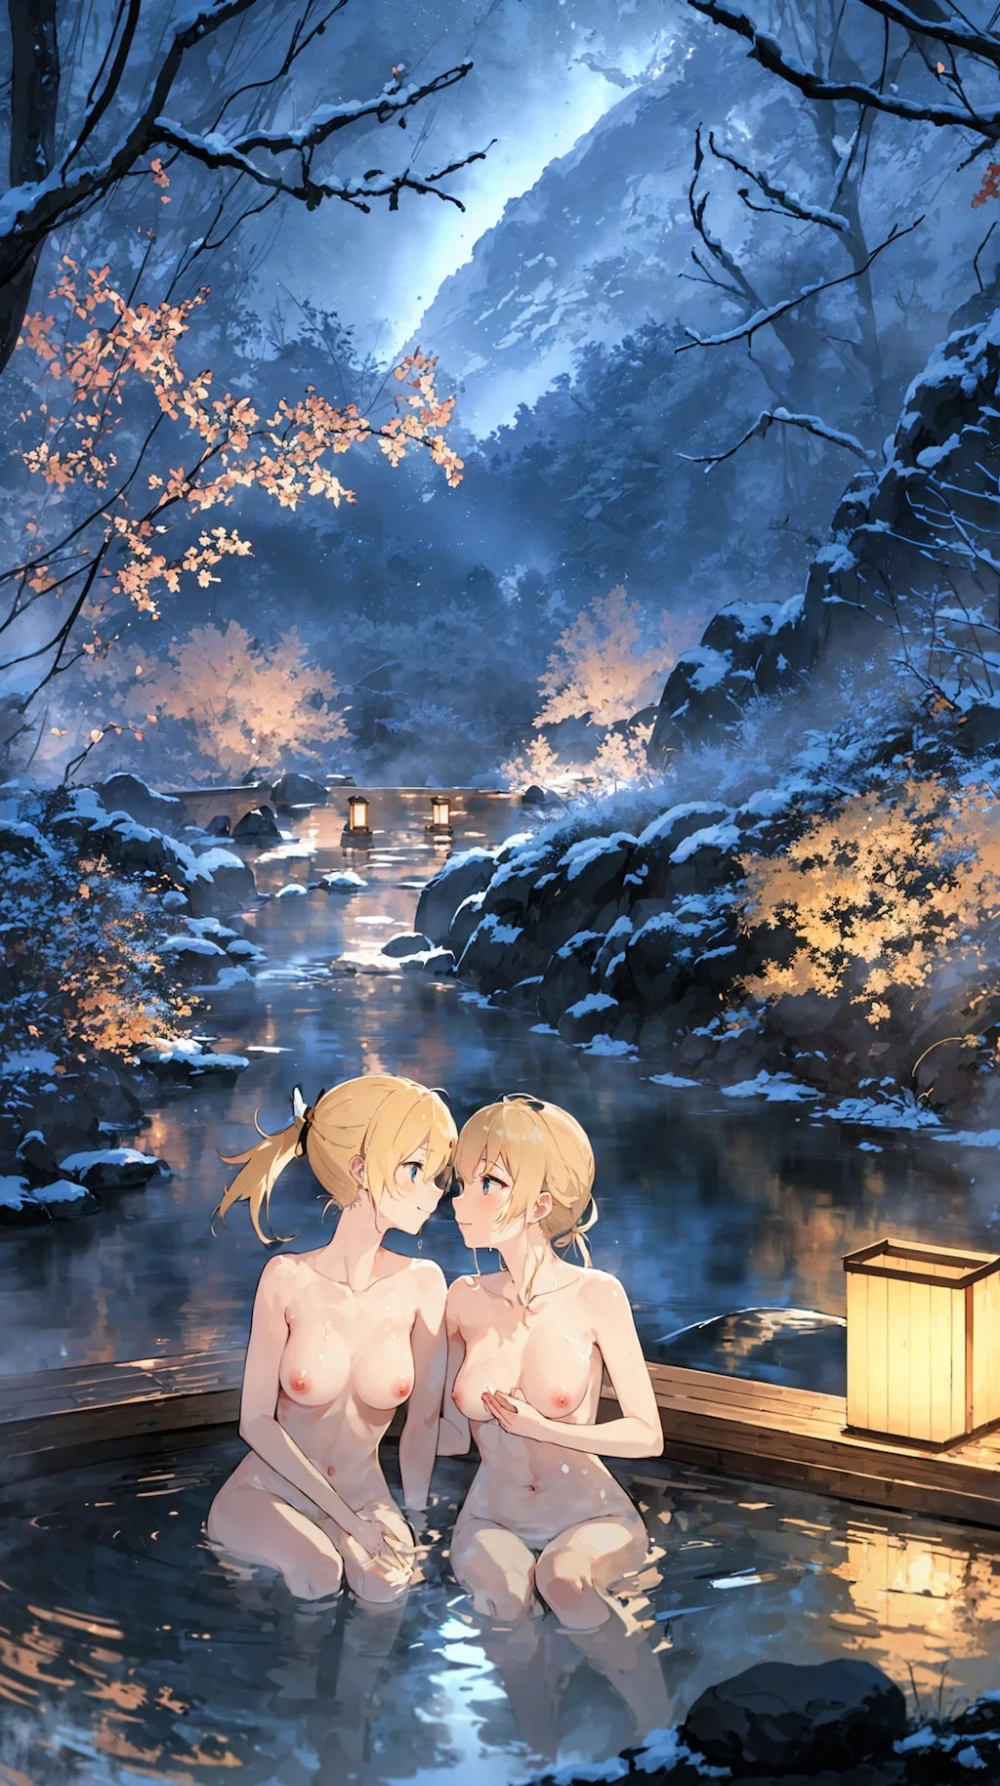 onsen-anime-style-adults-only-2-21